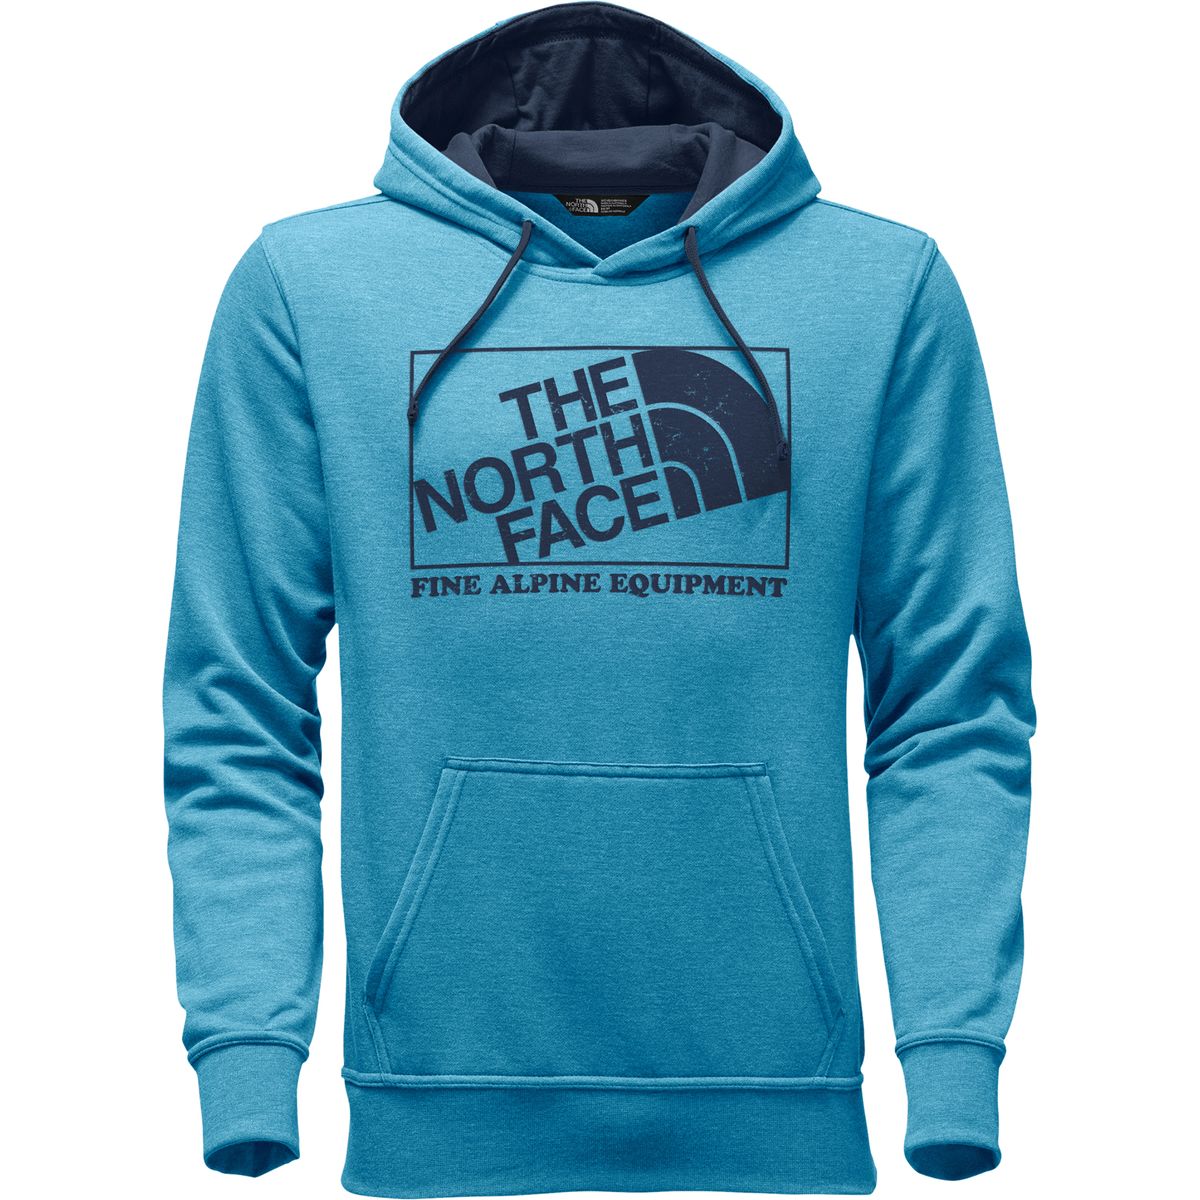 The North Face Super Fine Alpine Hoodie - Men's - Clothing